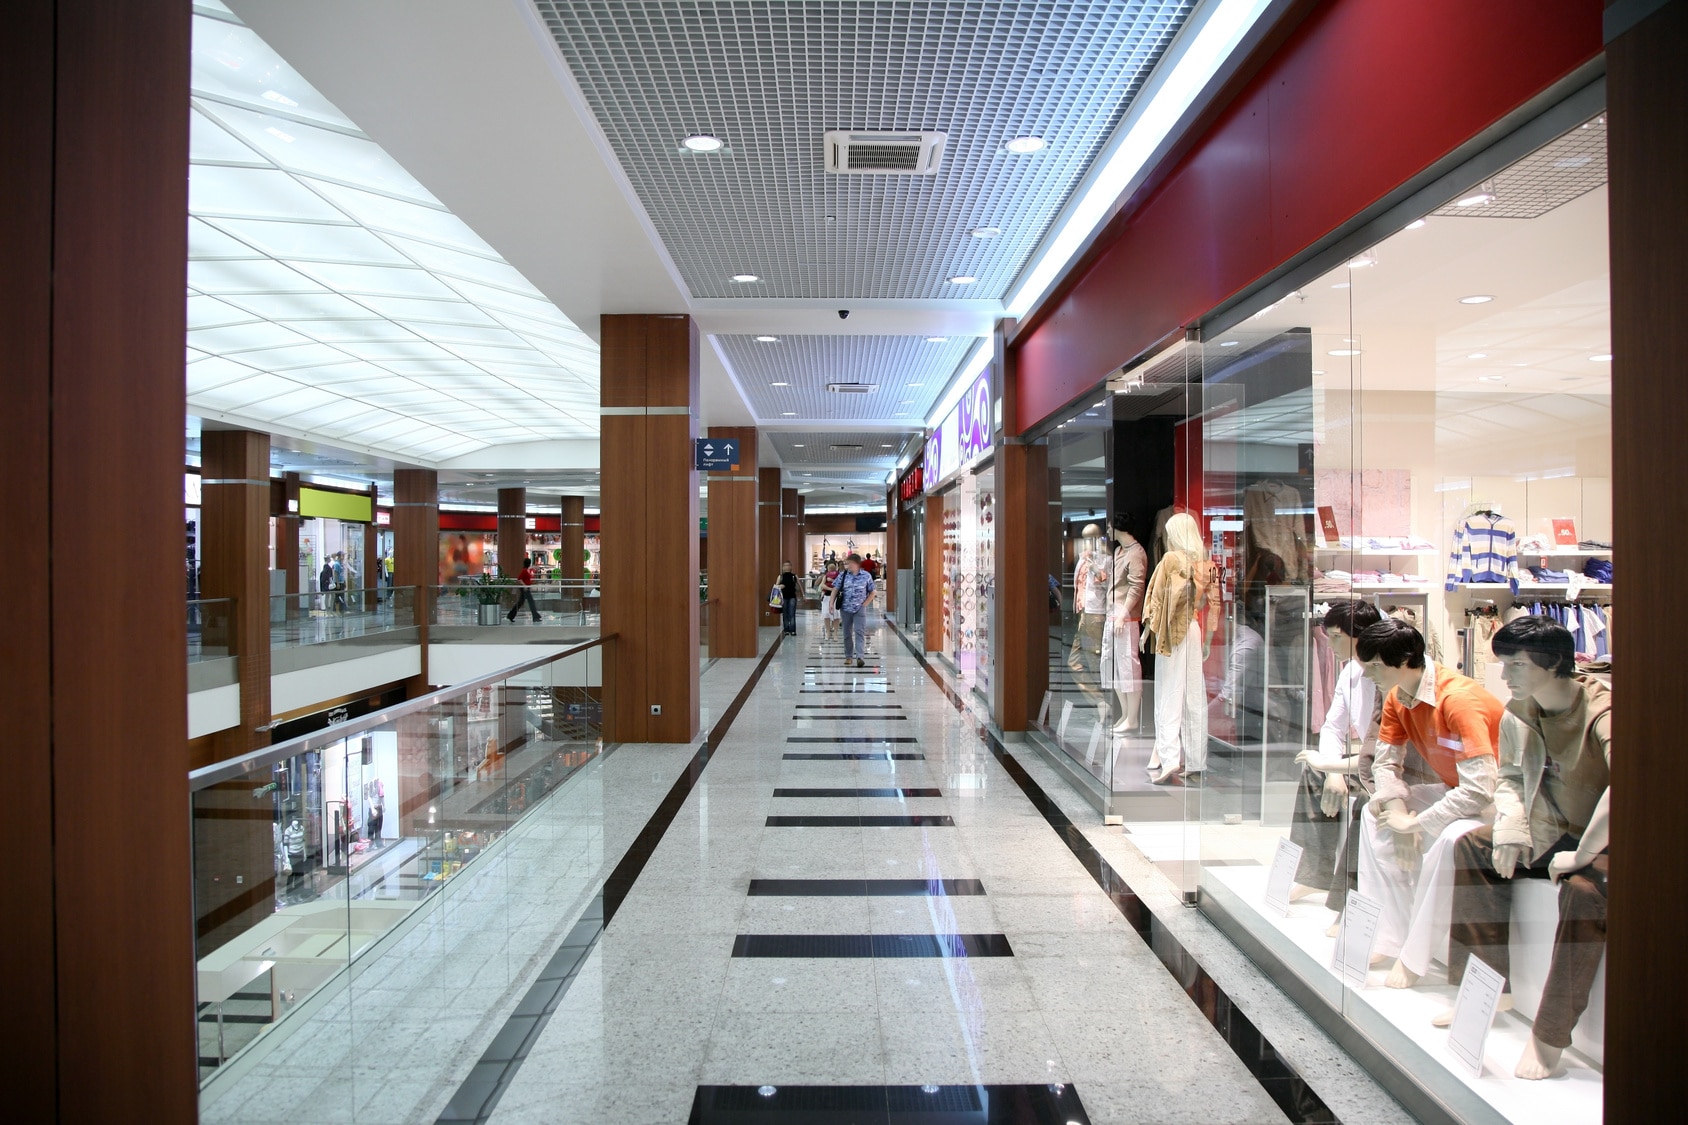 Is There A Future For Brick & Mortar Stores?